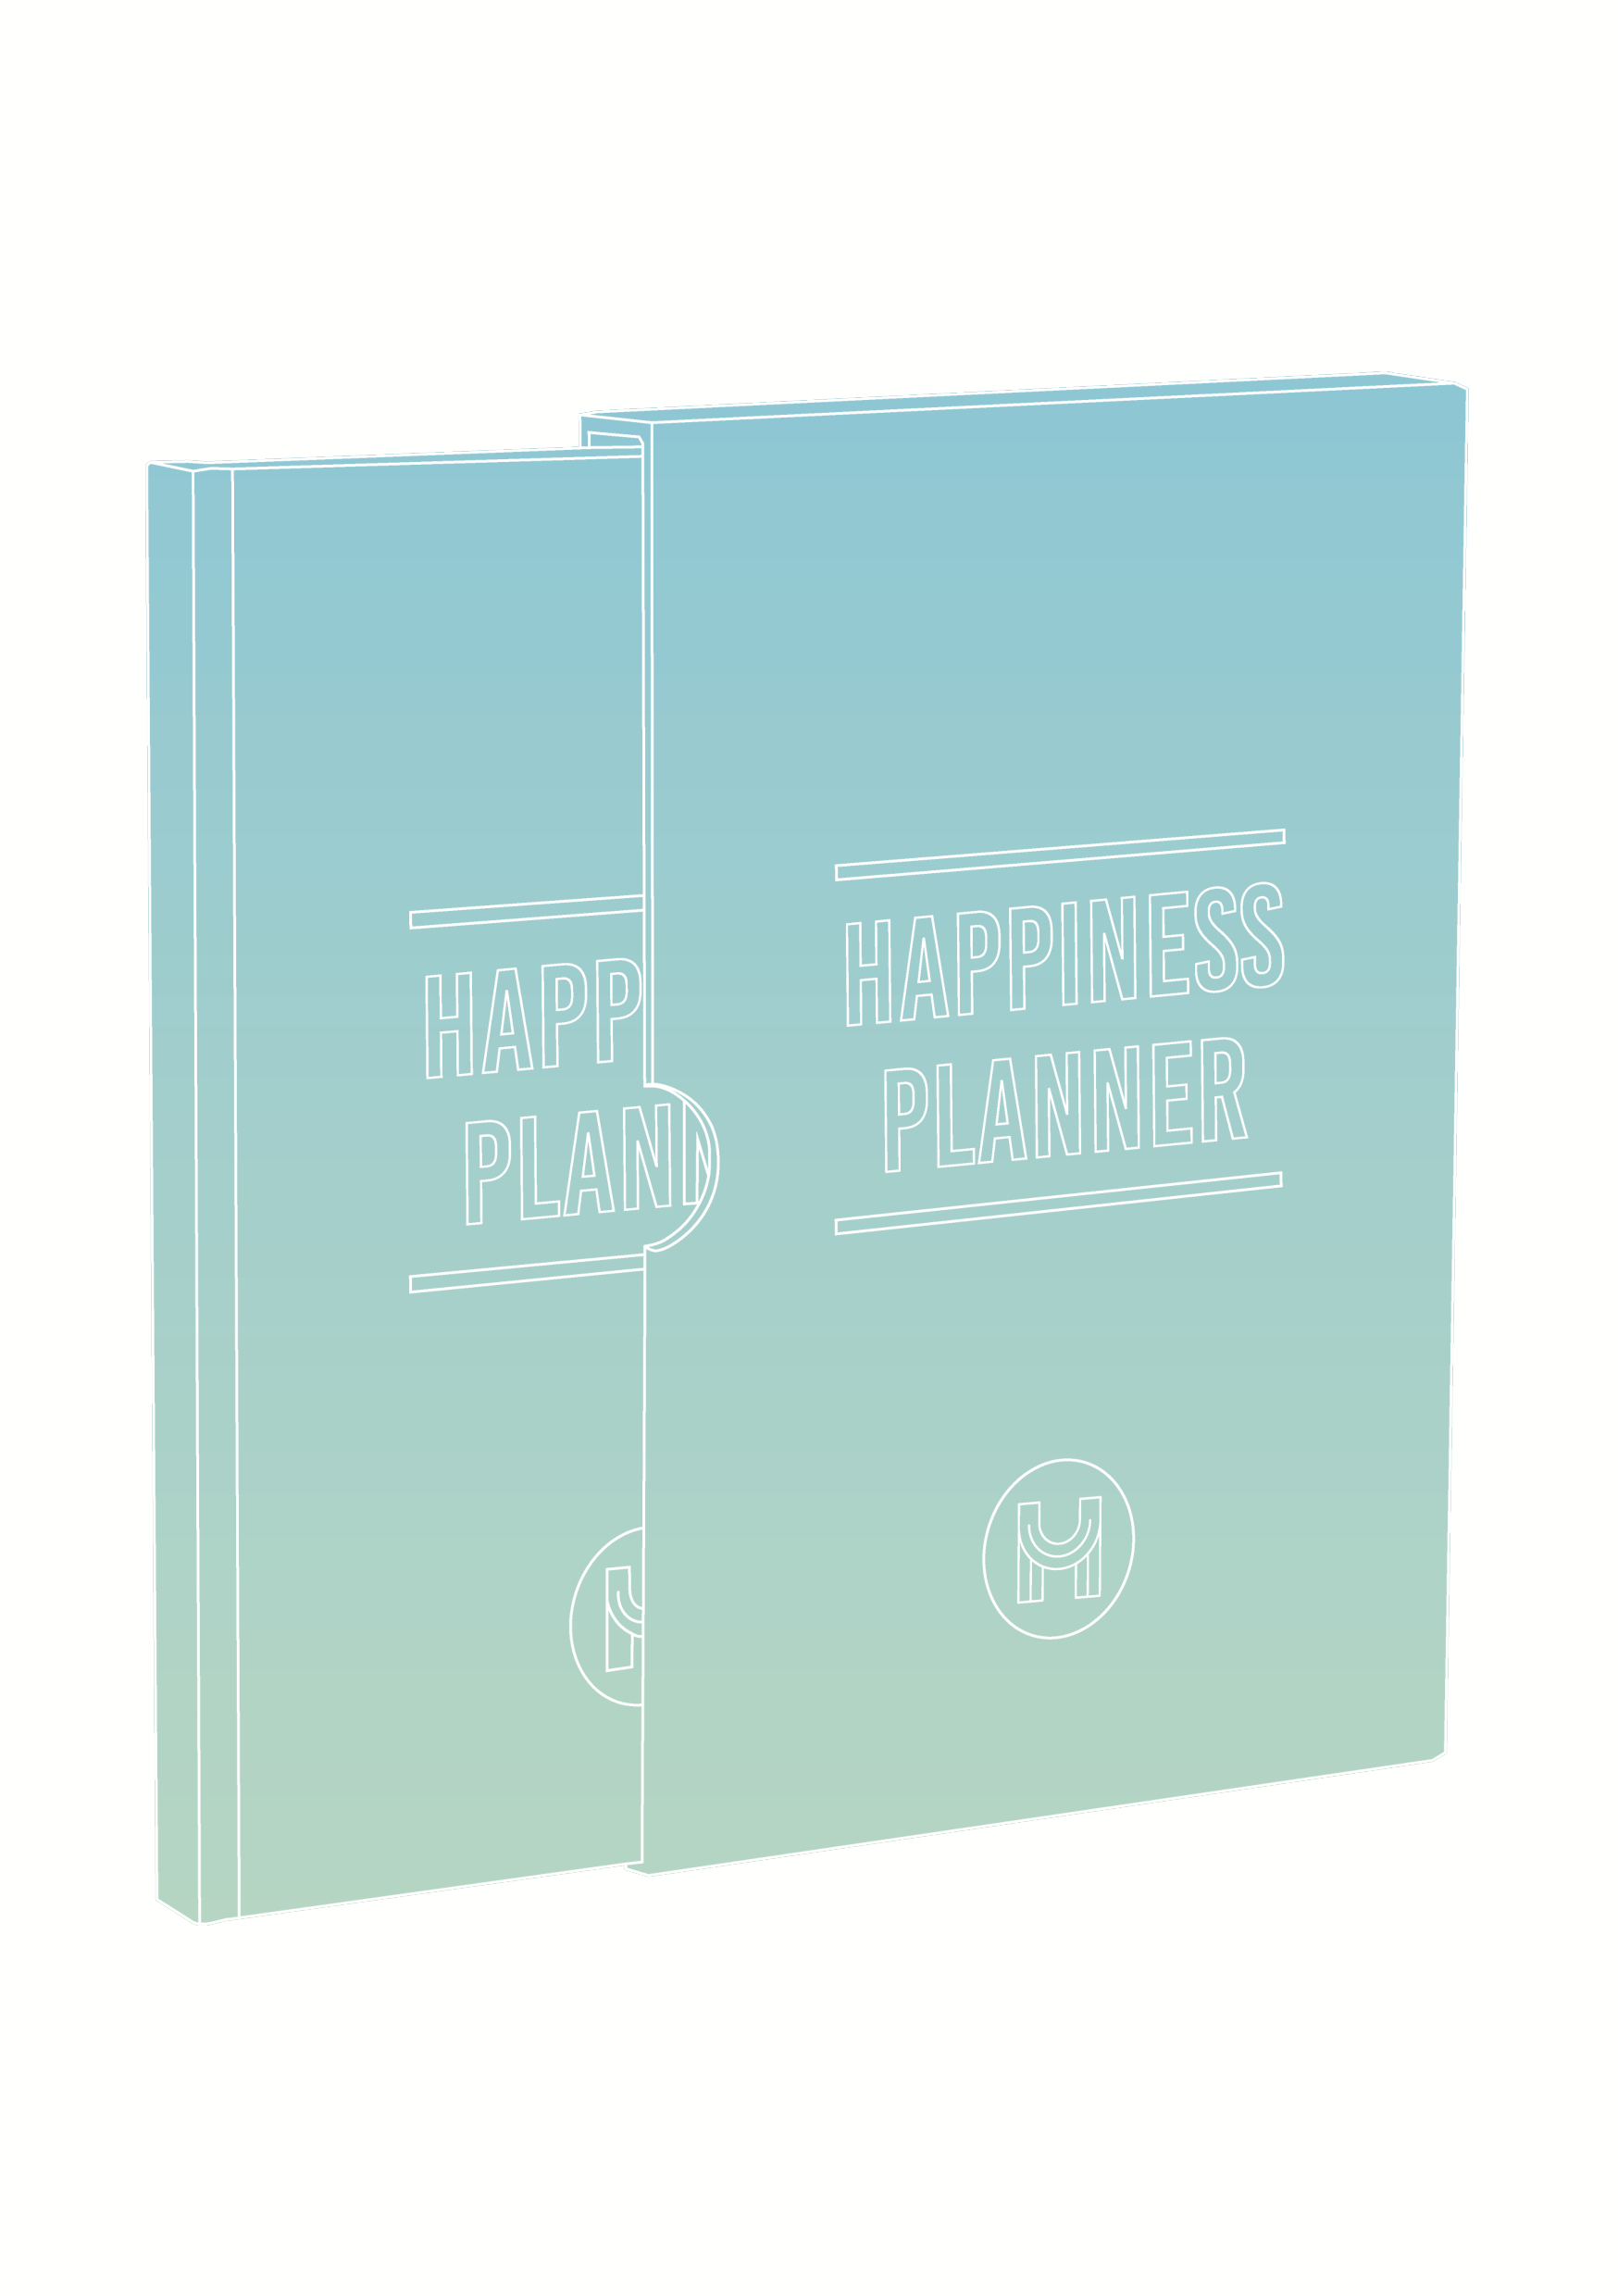 The Happiness Planner®, 100 days, undated